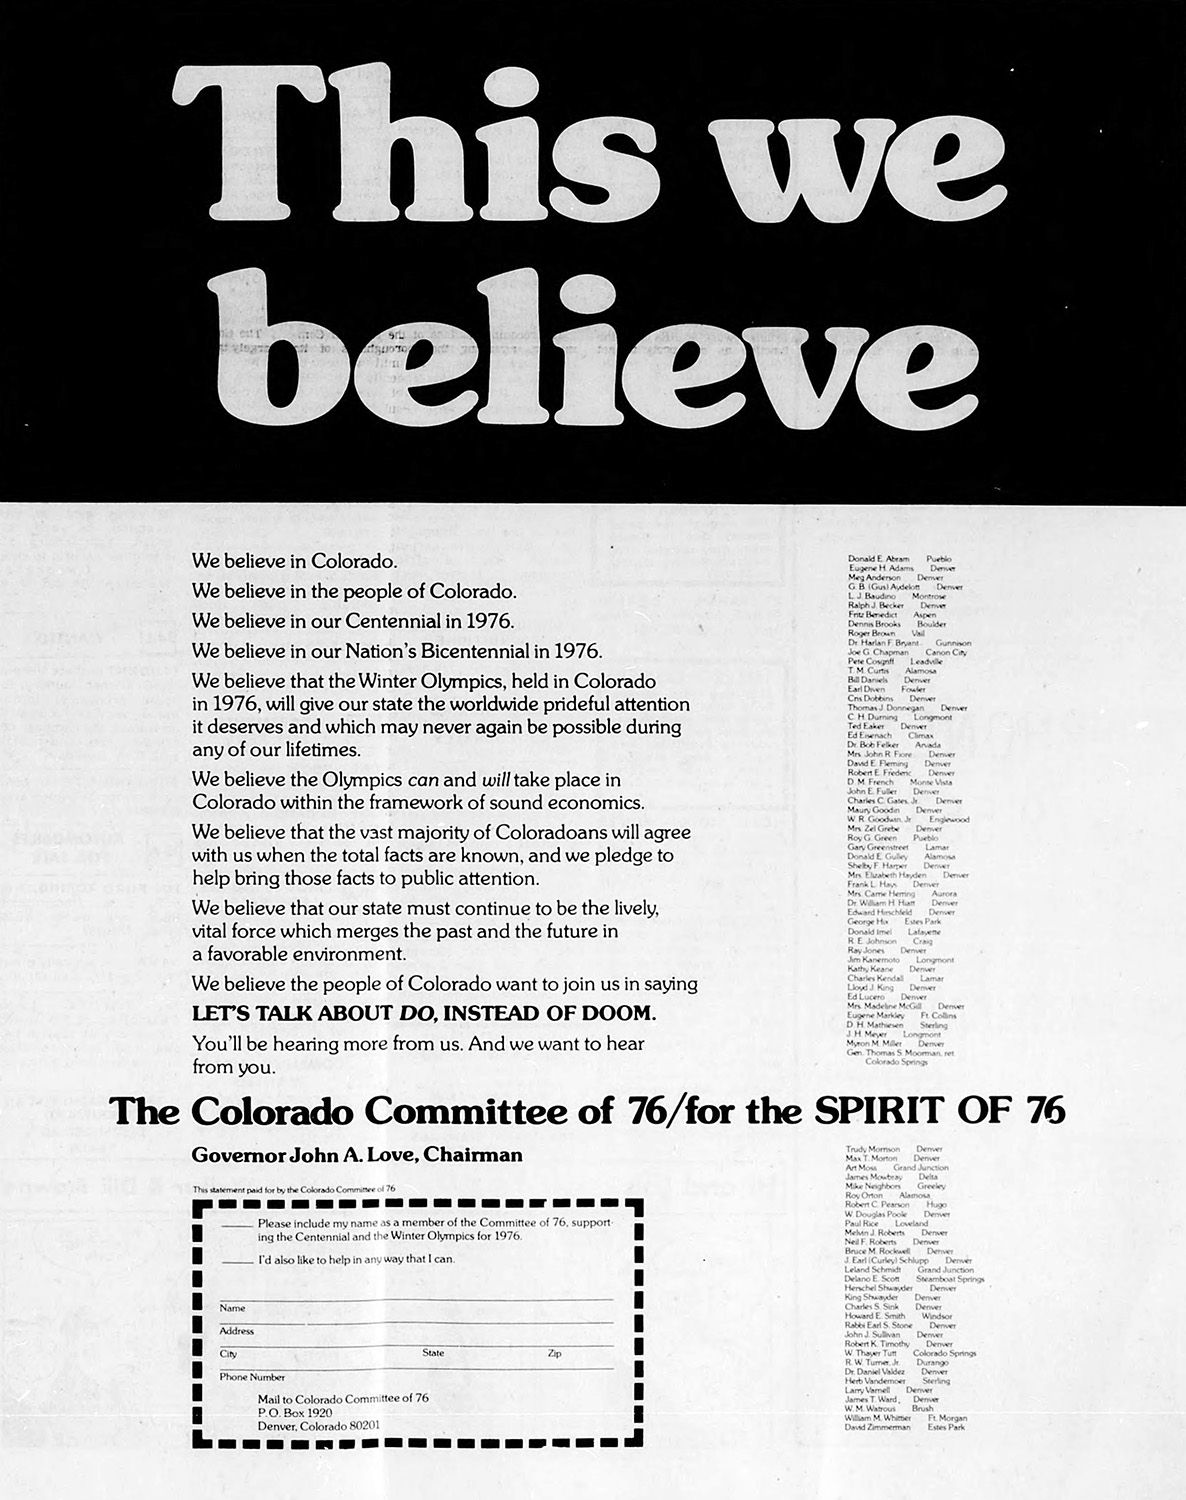 Newspaper ad urging Colorado voters to support the games by saying “Let’s talk about DO, instead of DOOM”